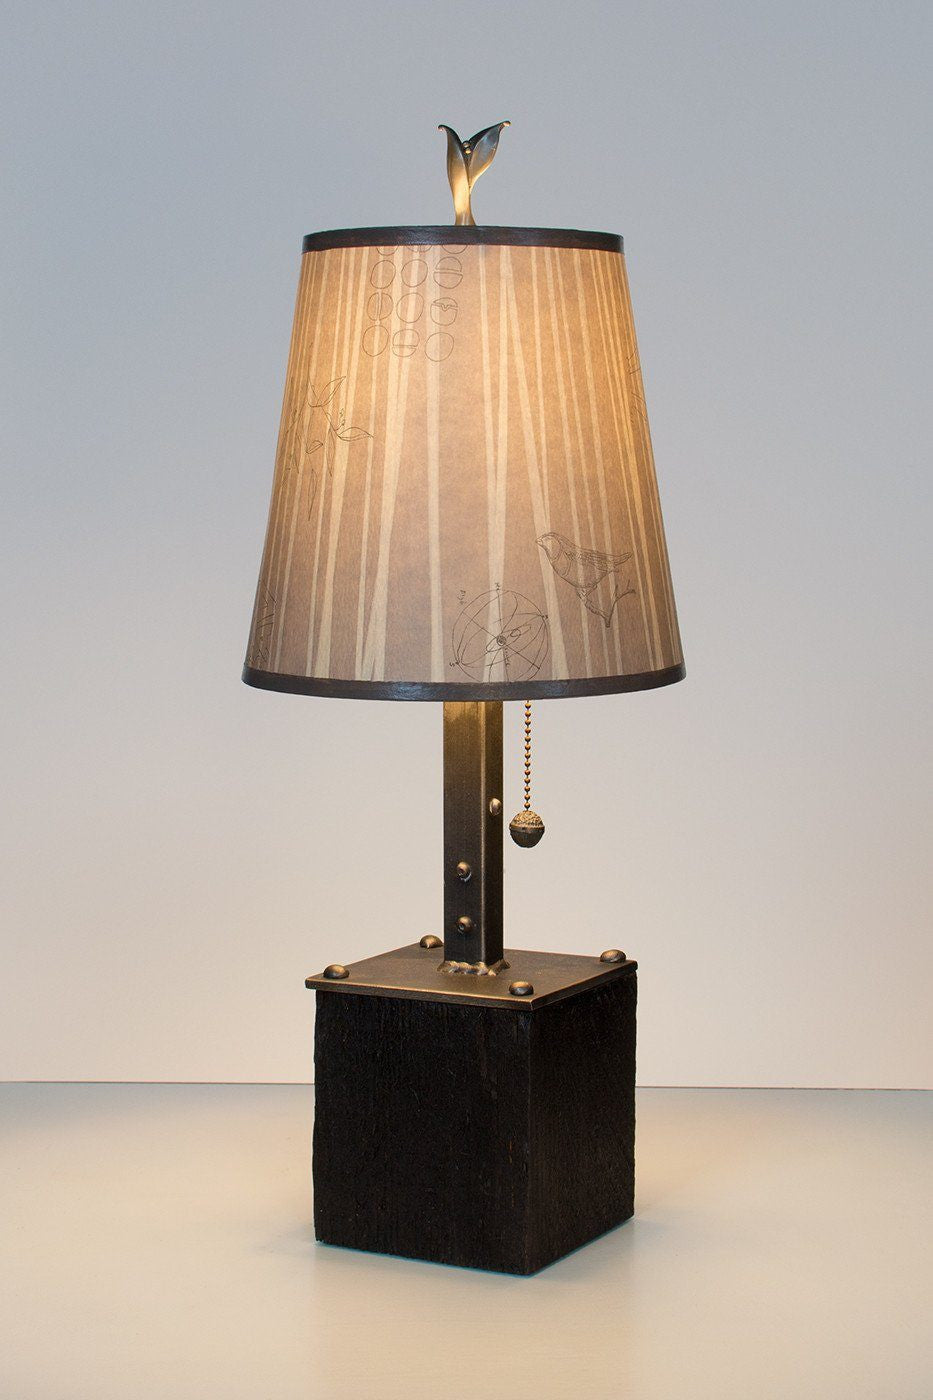 Janna Ugone &amp; Co Table Lamps Steel Table Lamp on Reclaimed Wood with Small Drum Shade in Birch Lines